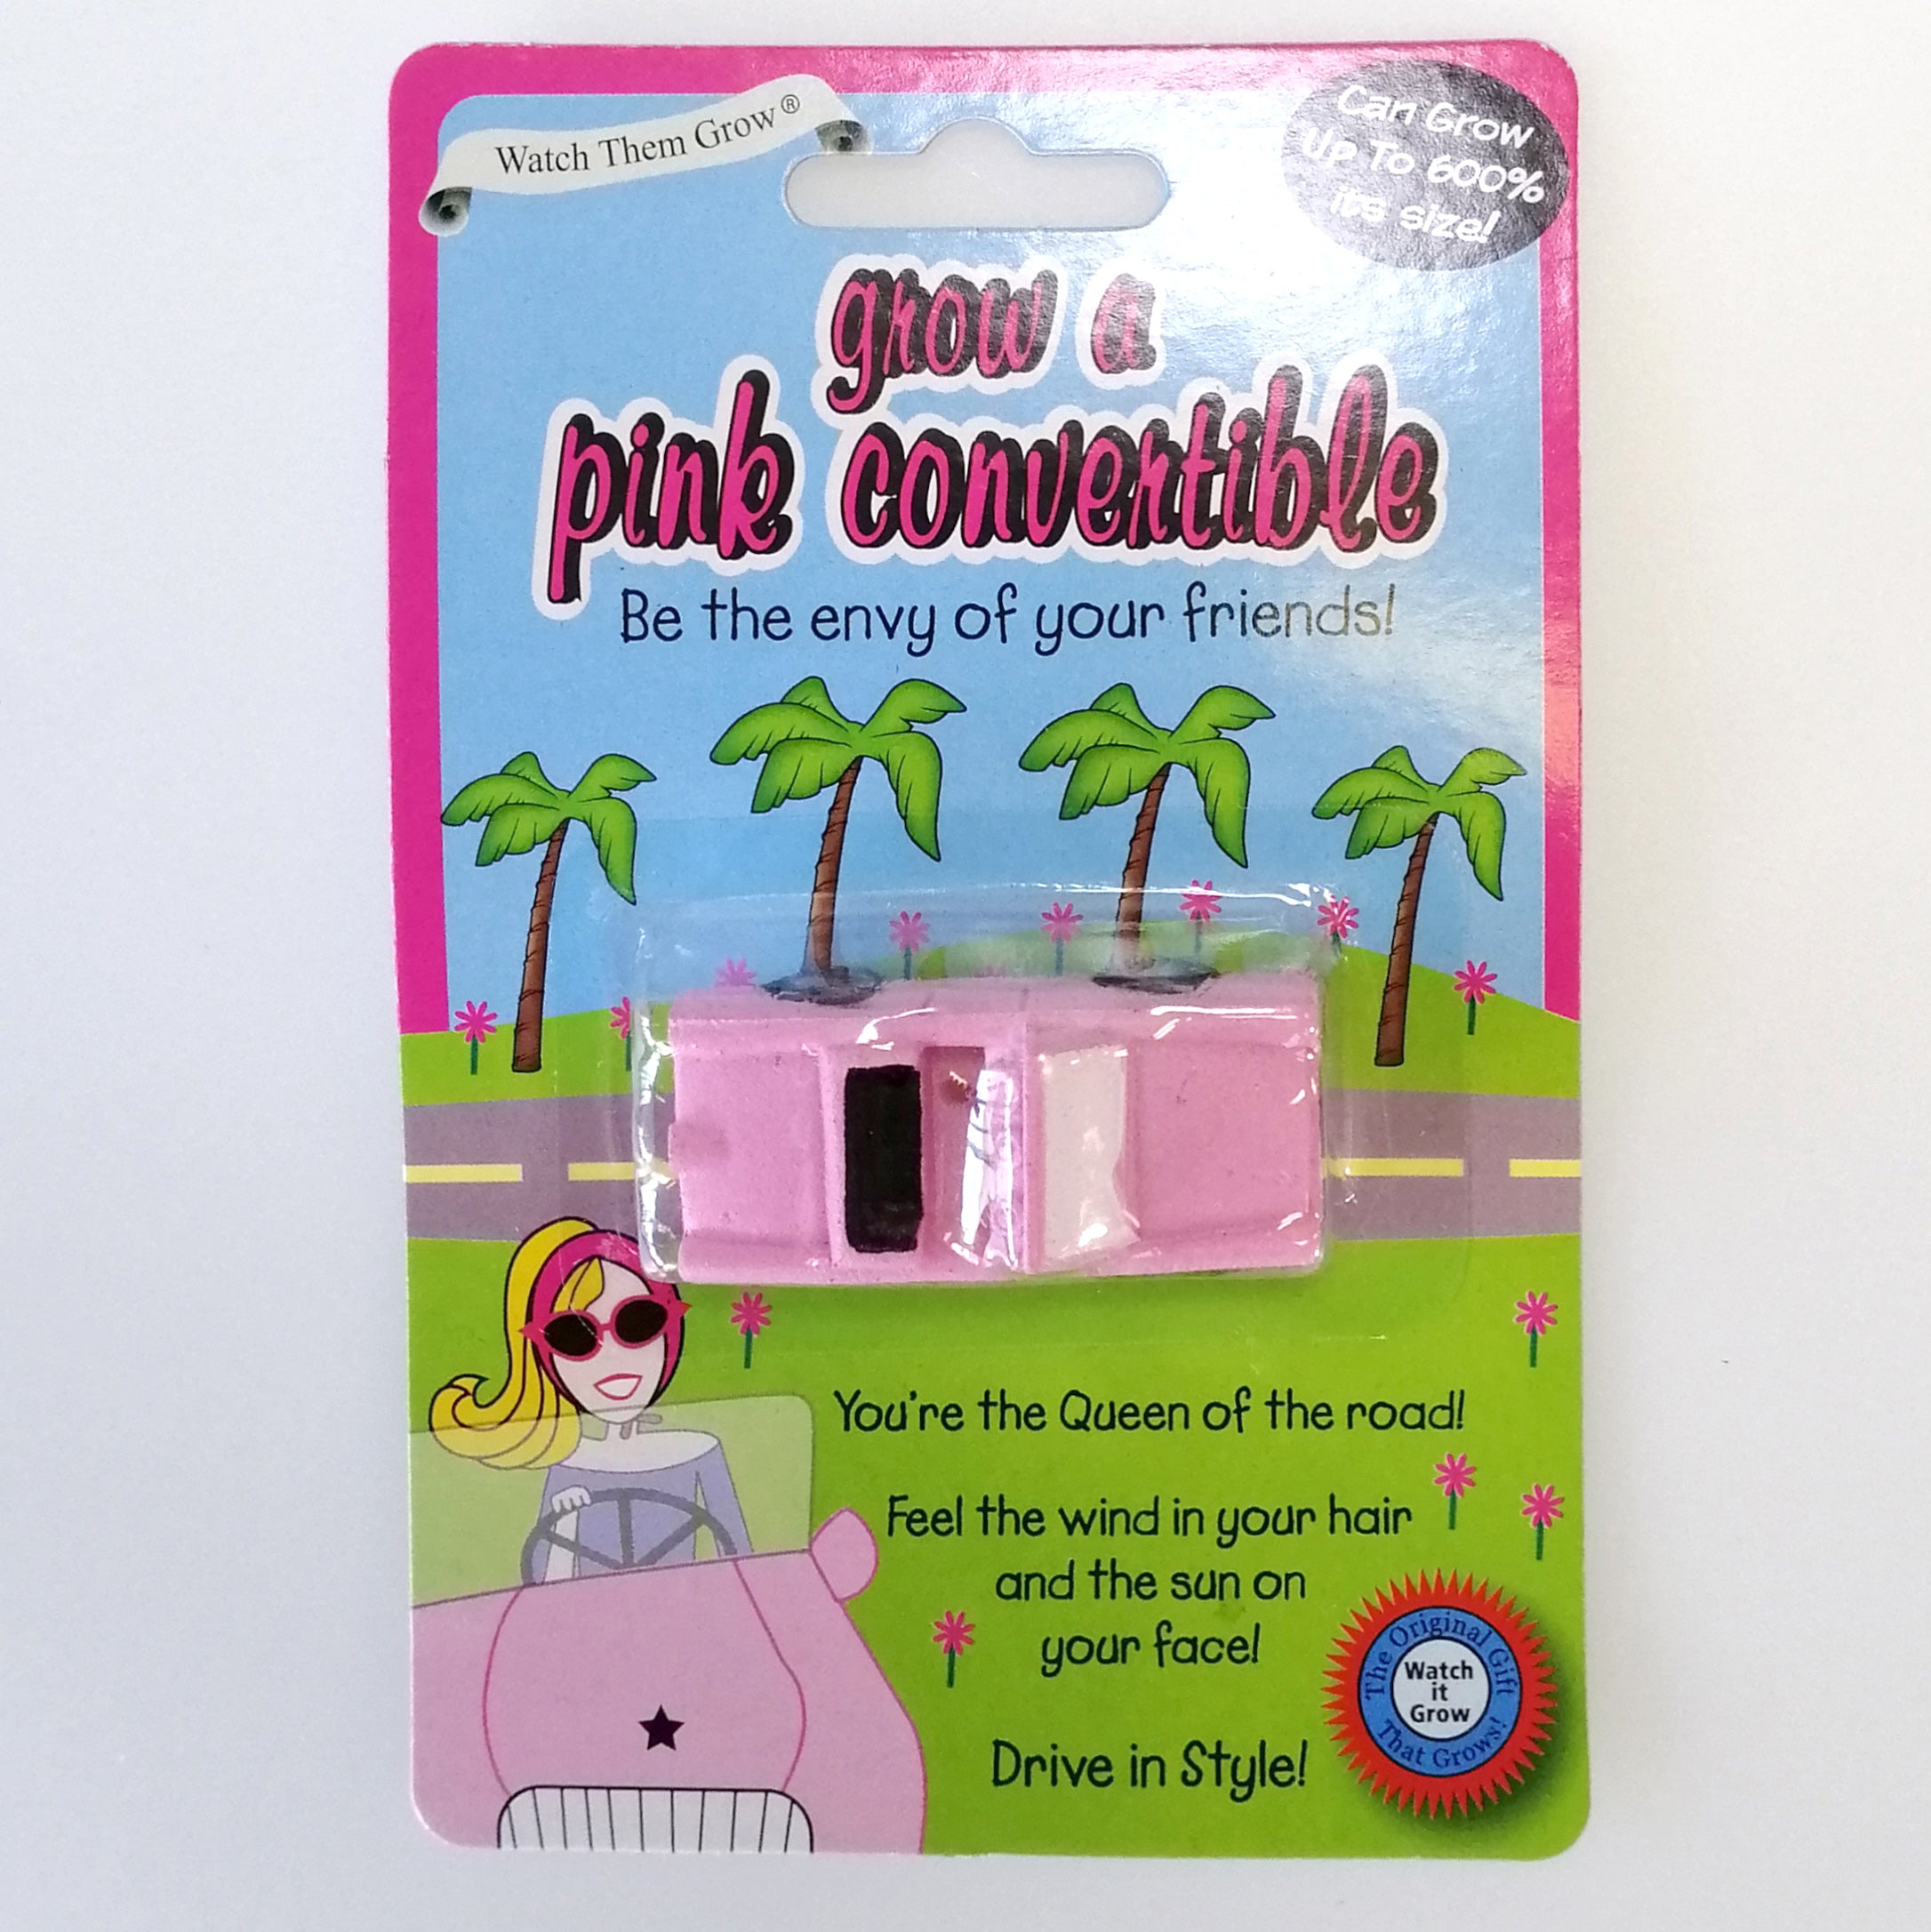 Grow Your Own Pink Convertible, novelty and fun, novelty